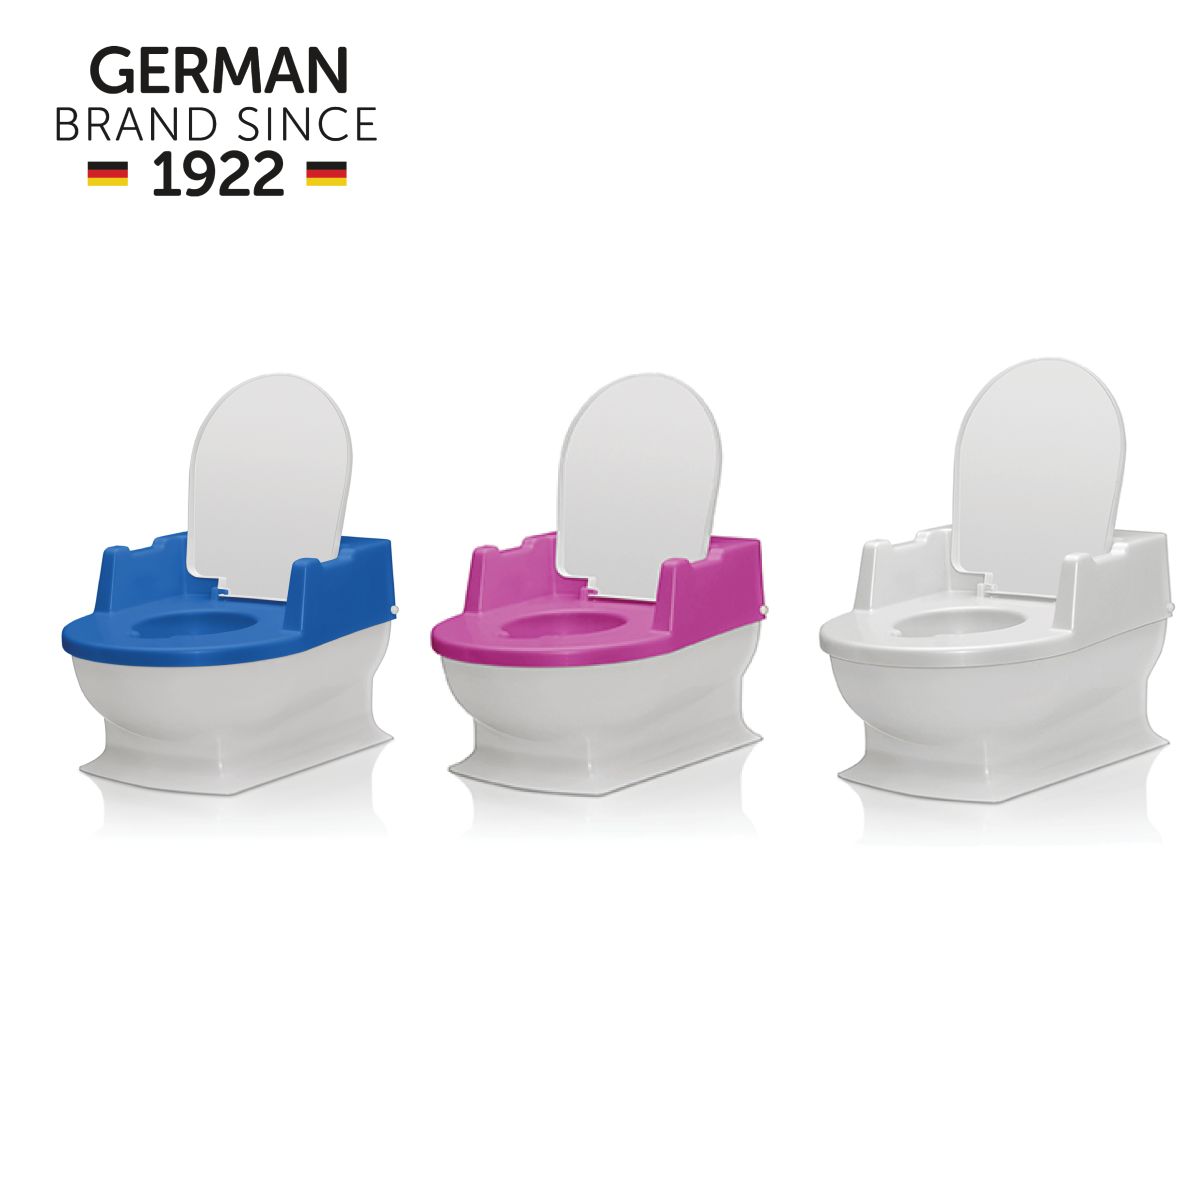 Reer Sitzfritz - The mini-toilet for growing up (Blue)